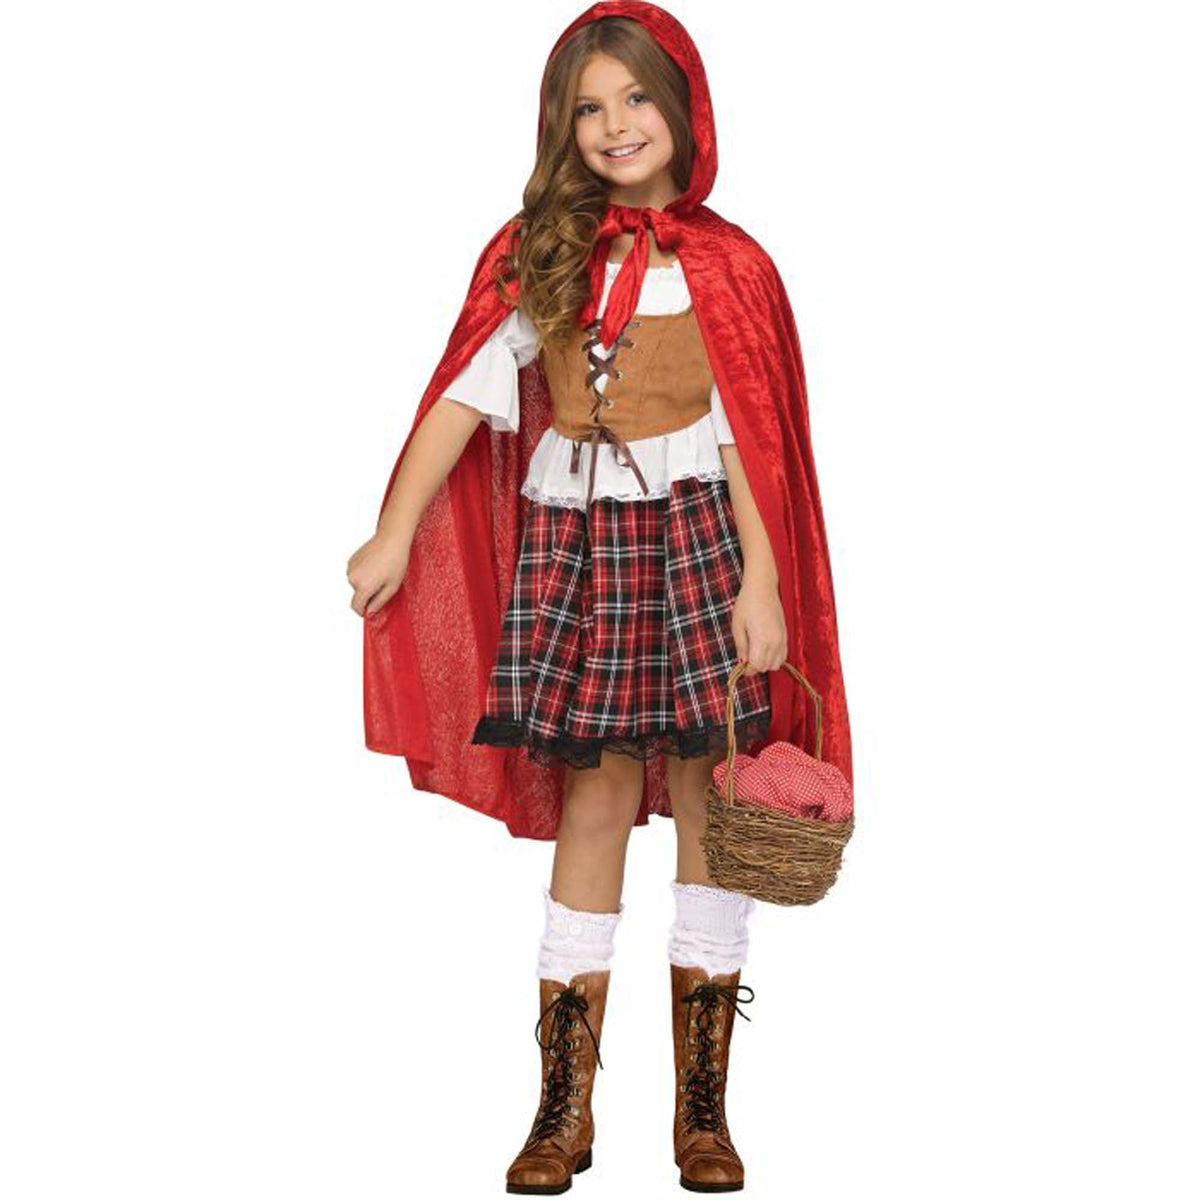 FUN WORLD Costumes Red Riding Hood Costume for Kids, Dress and Red Hood